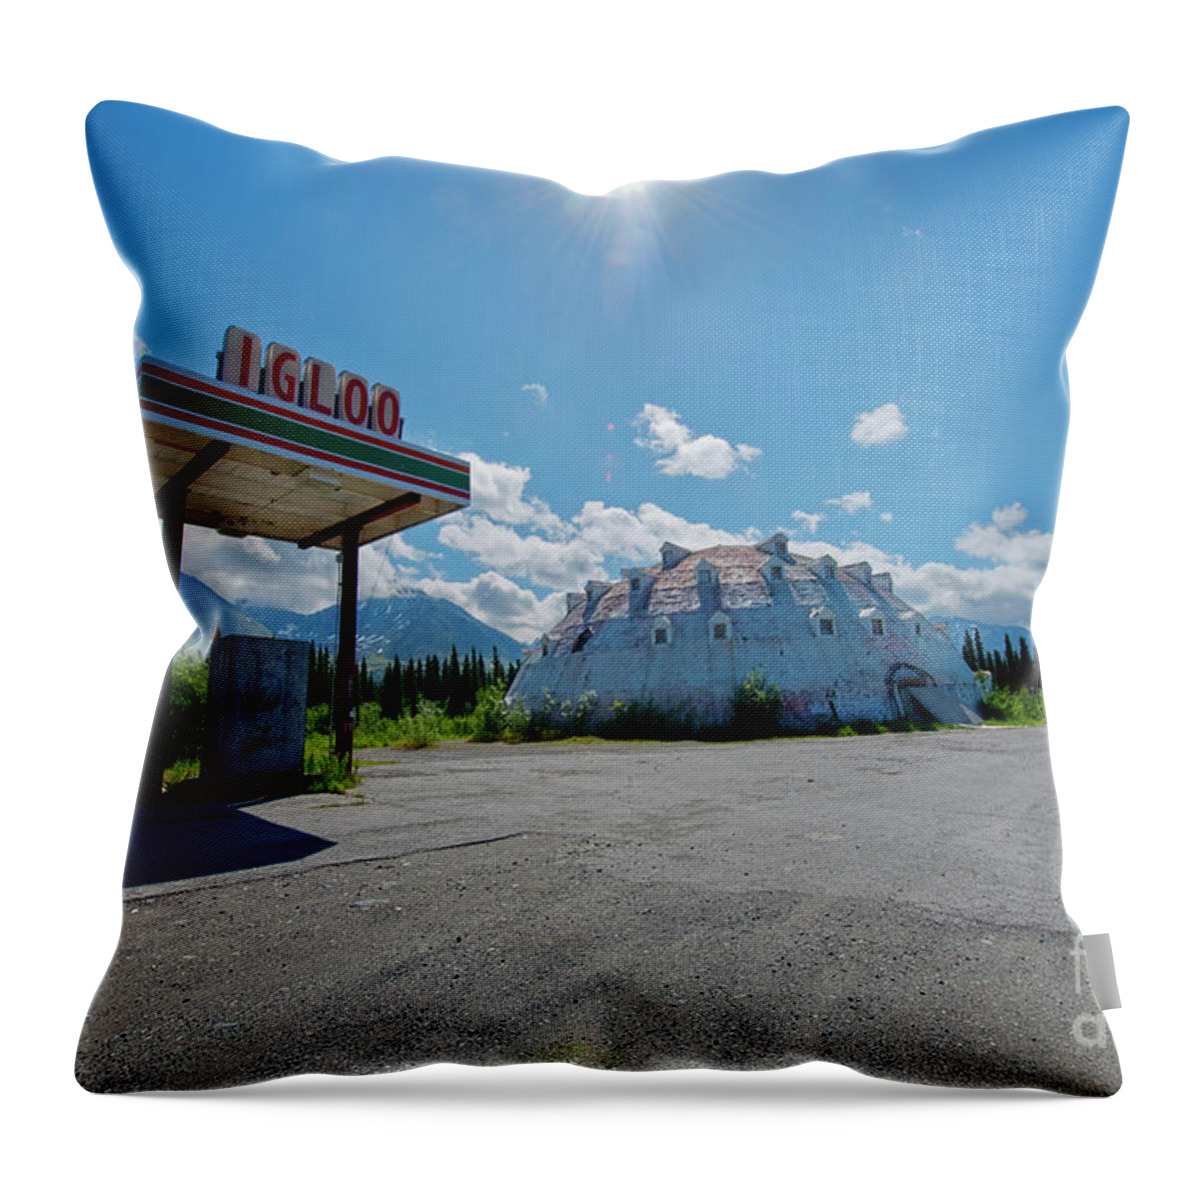 Igloo Building Throw Pillow featuring the photograph Igloo by David Arment